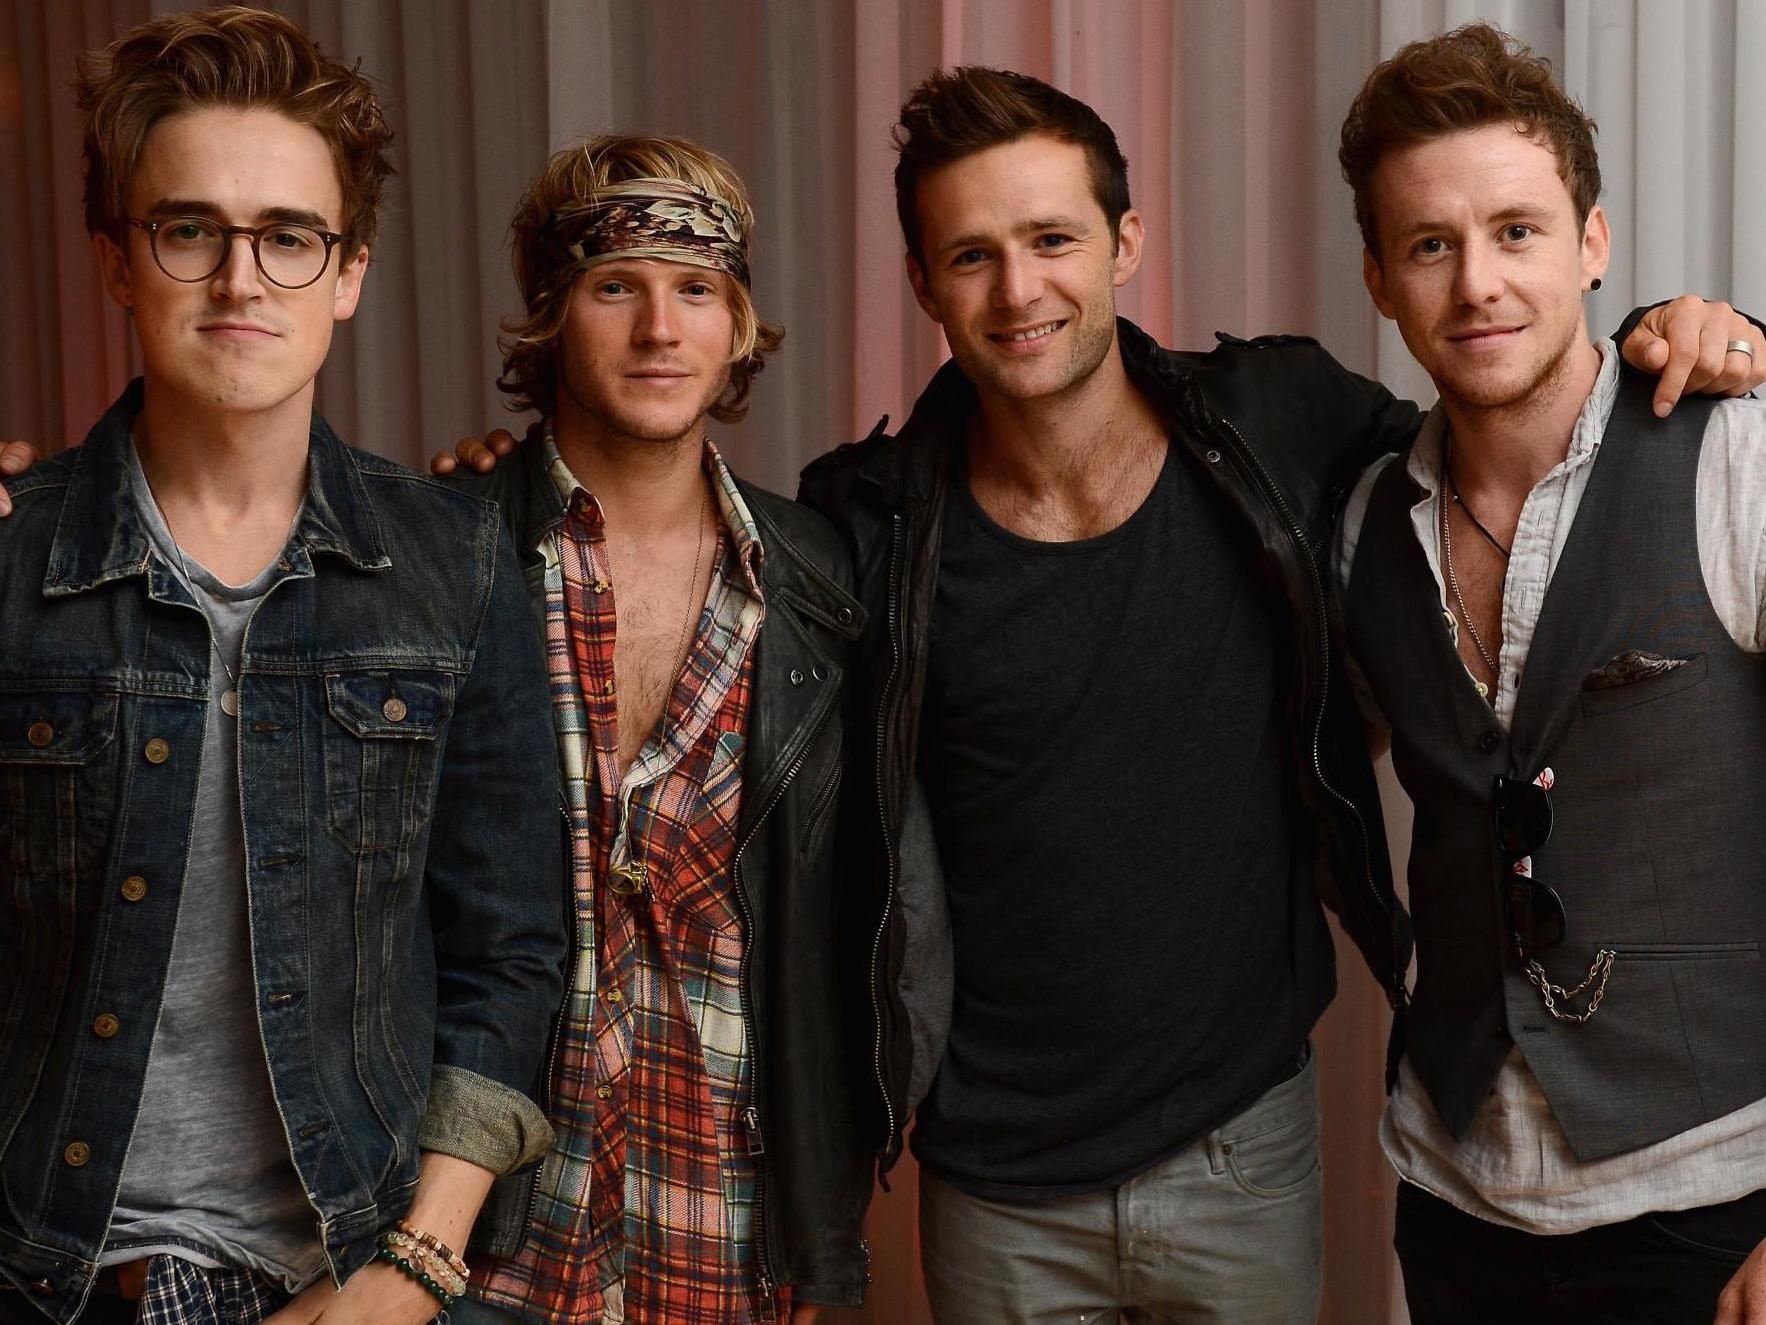 McFly excite fans with cryptic video on Twitter, The Independent